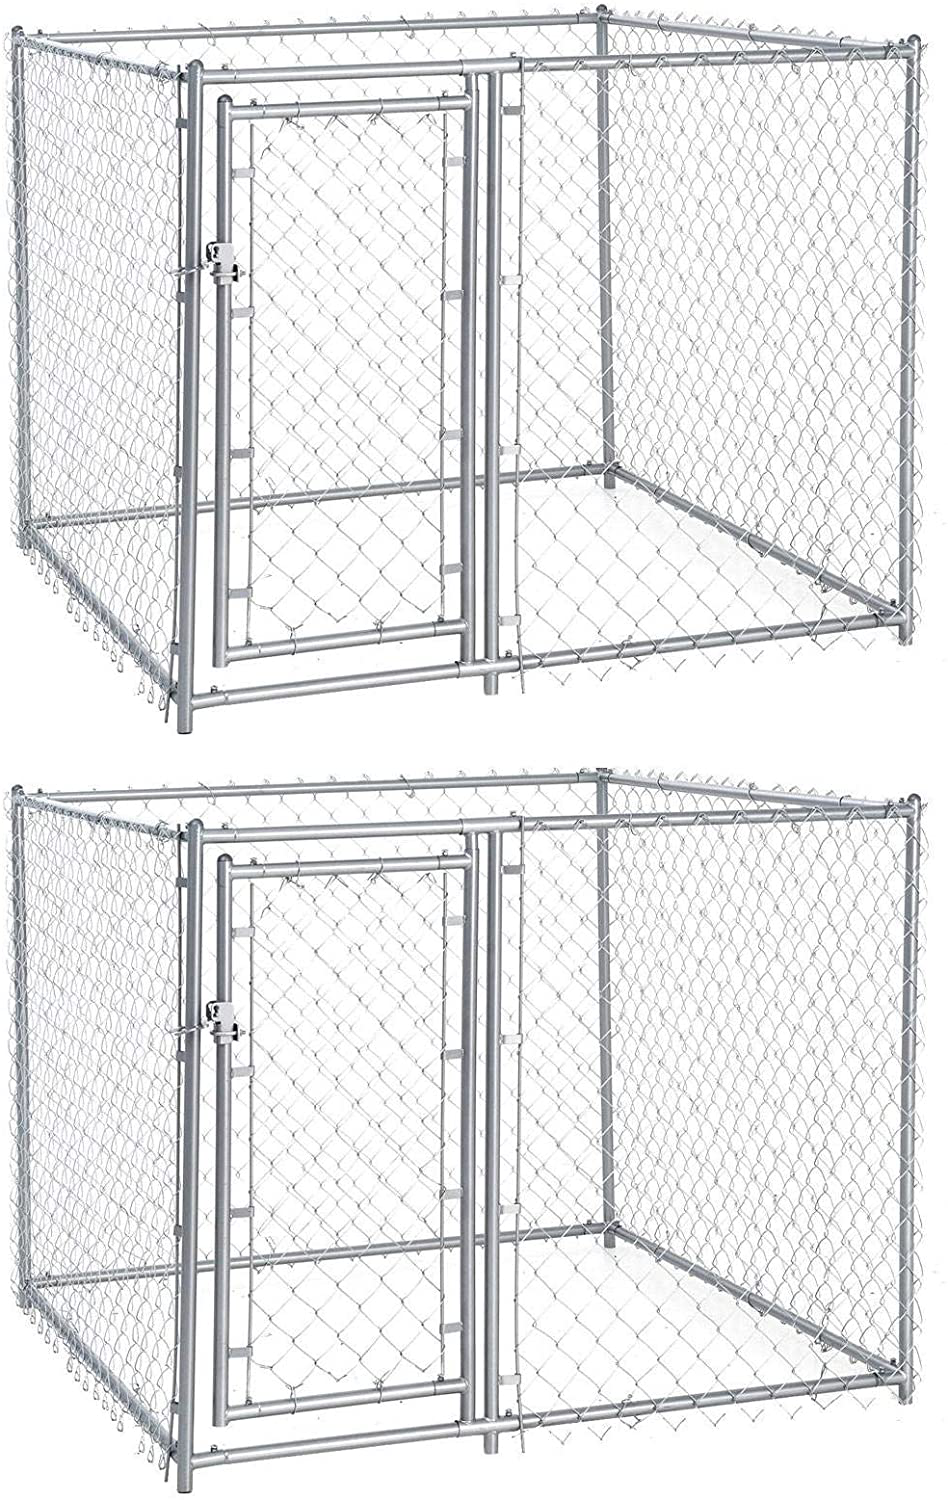 Lucky Dog 5 X 5 X 4 Foot Heavy Duty Outdoor Chain Link Dog Kennel (2 Pack)